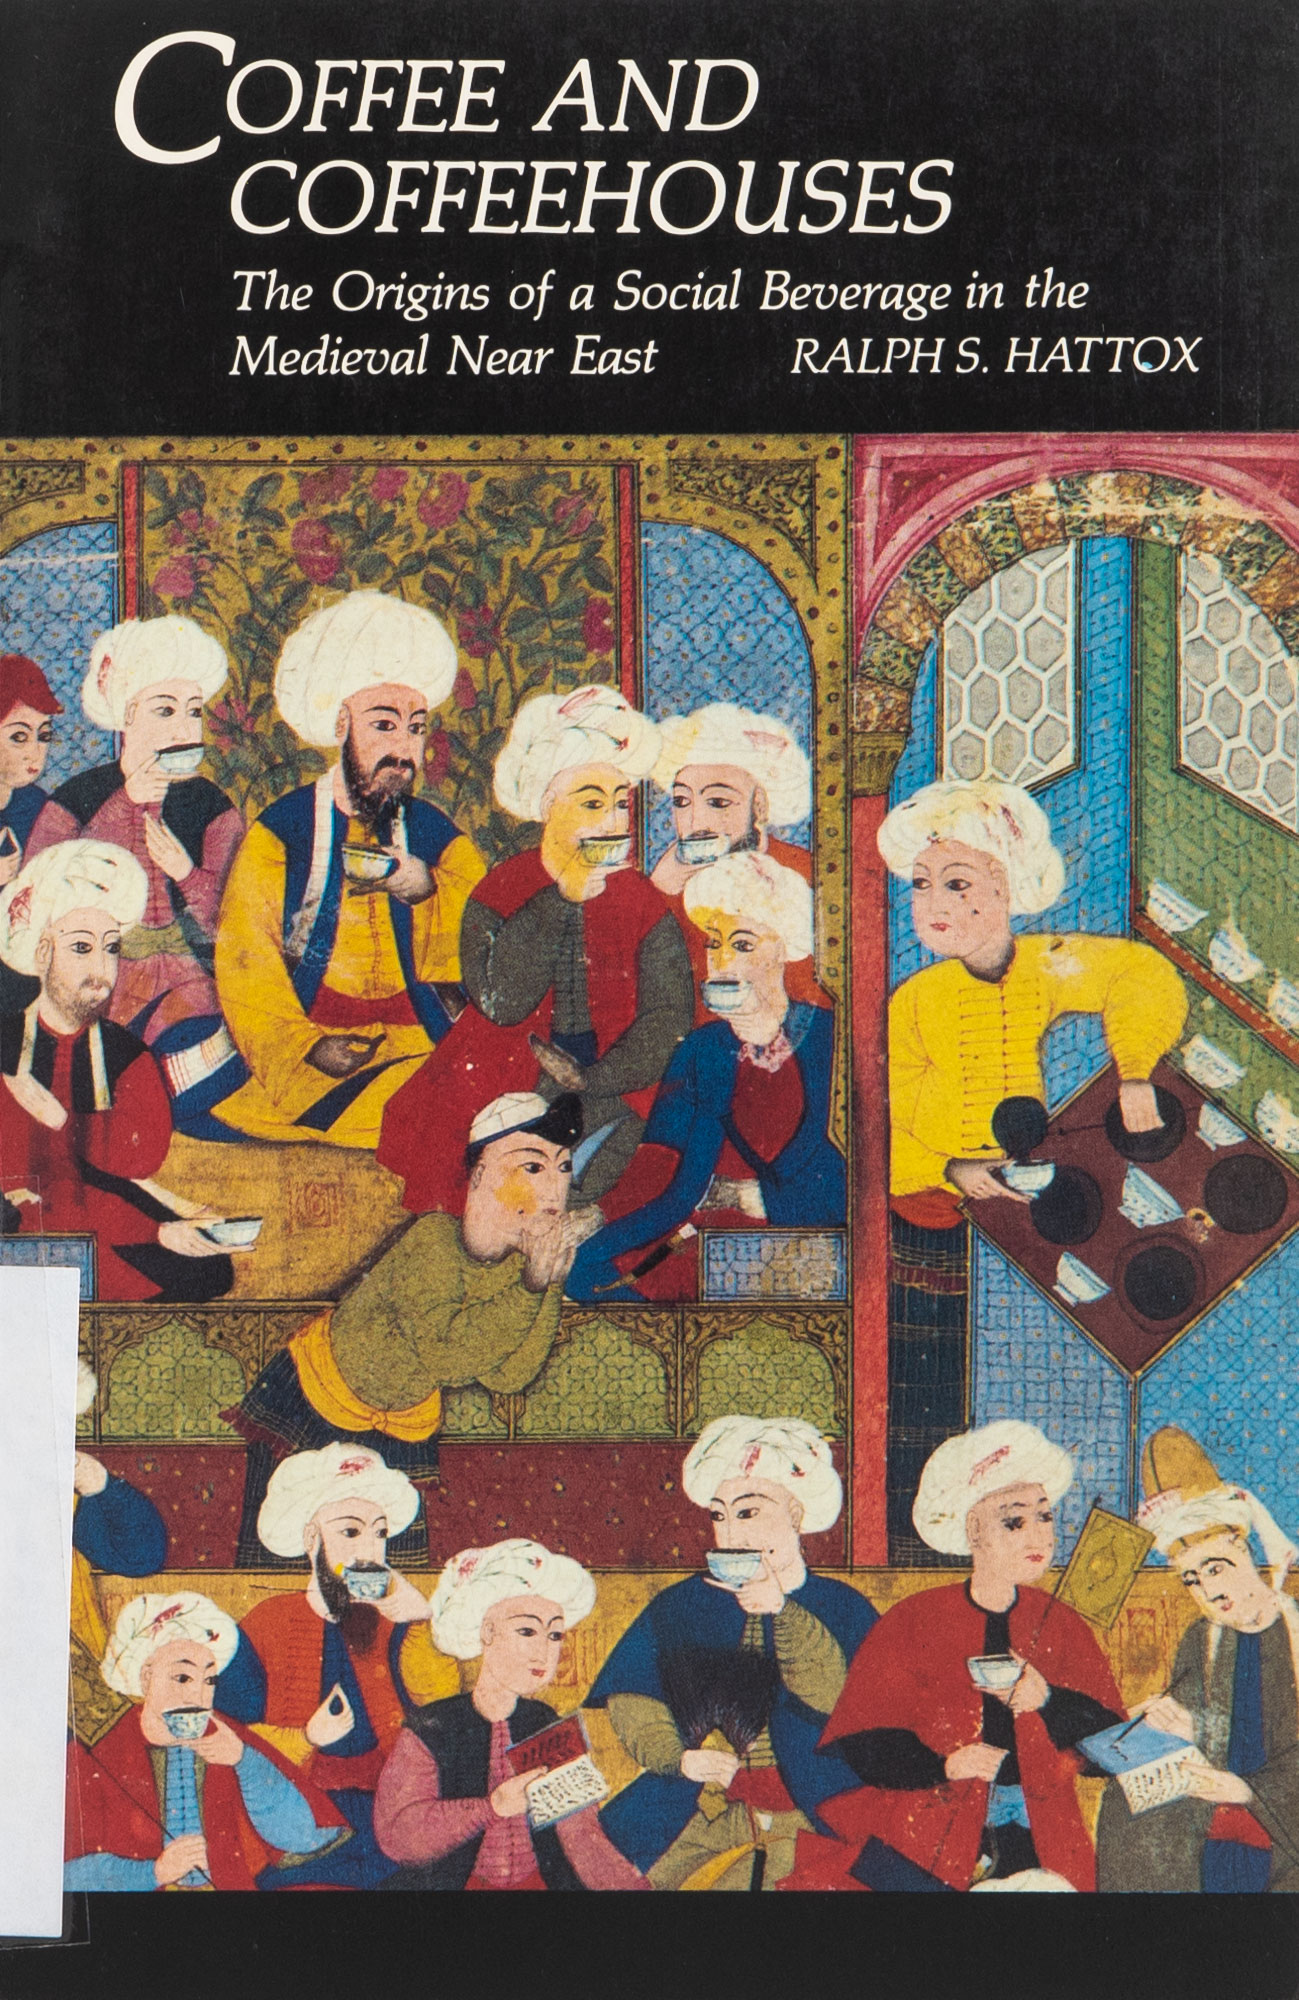 Book cover with East Asian painting of people wearing turbans sipping coffee